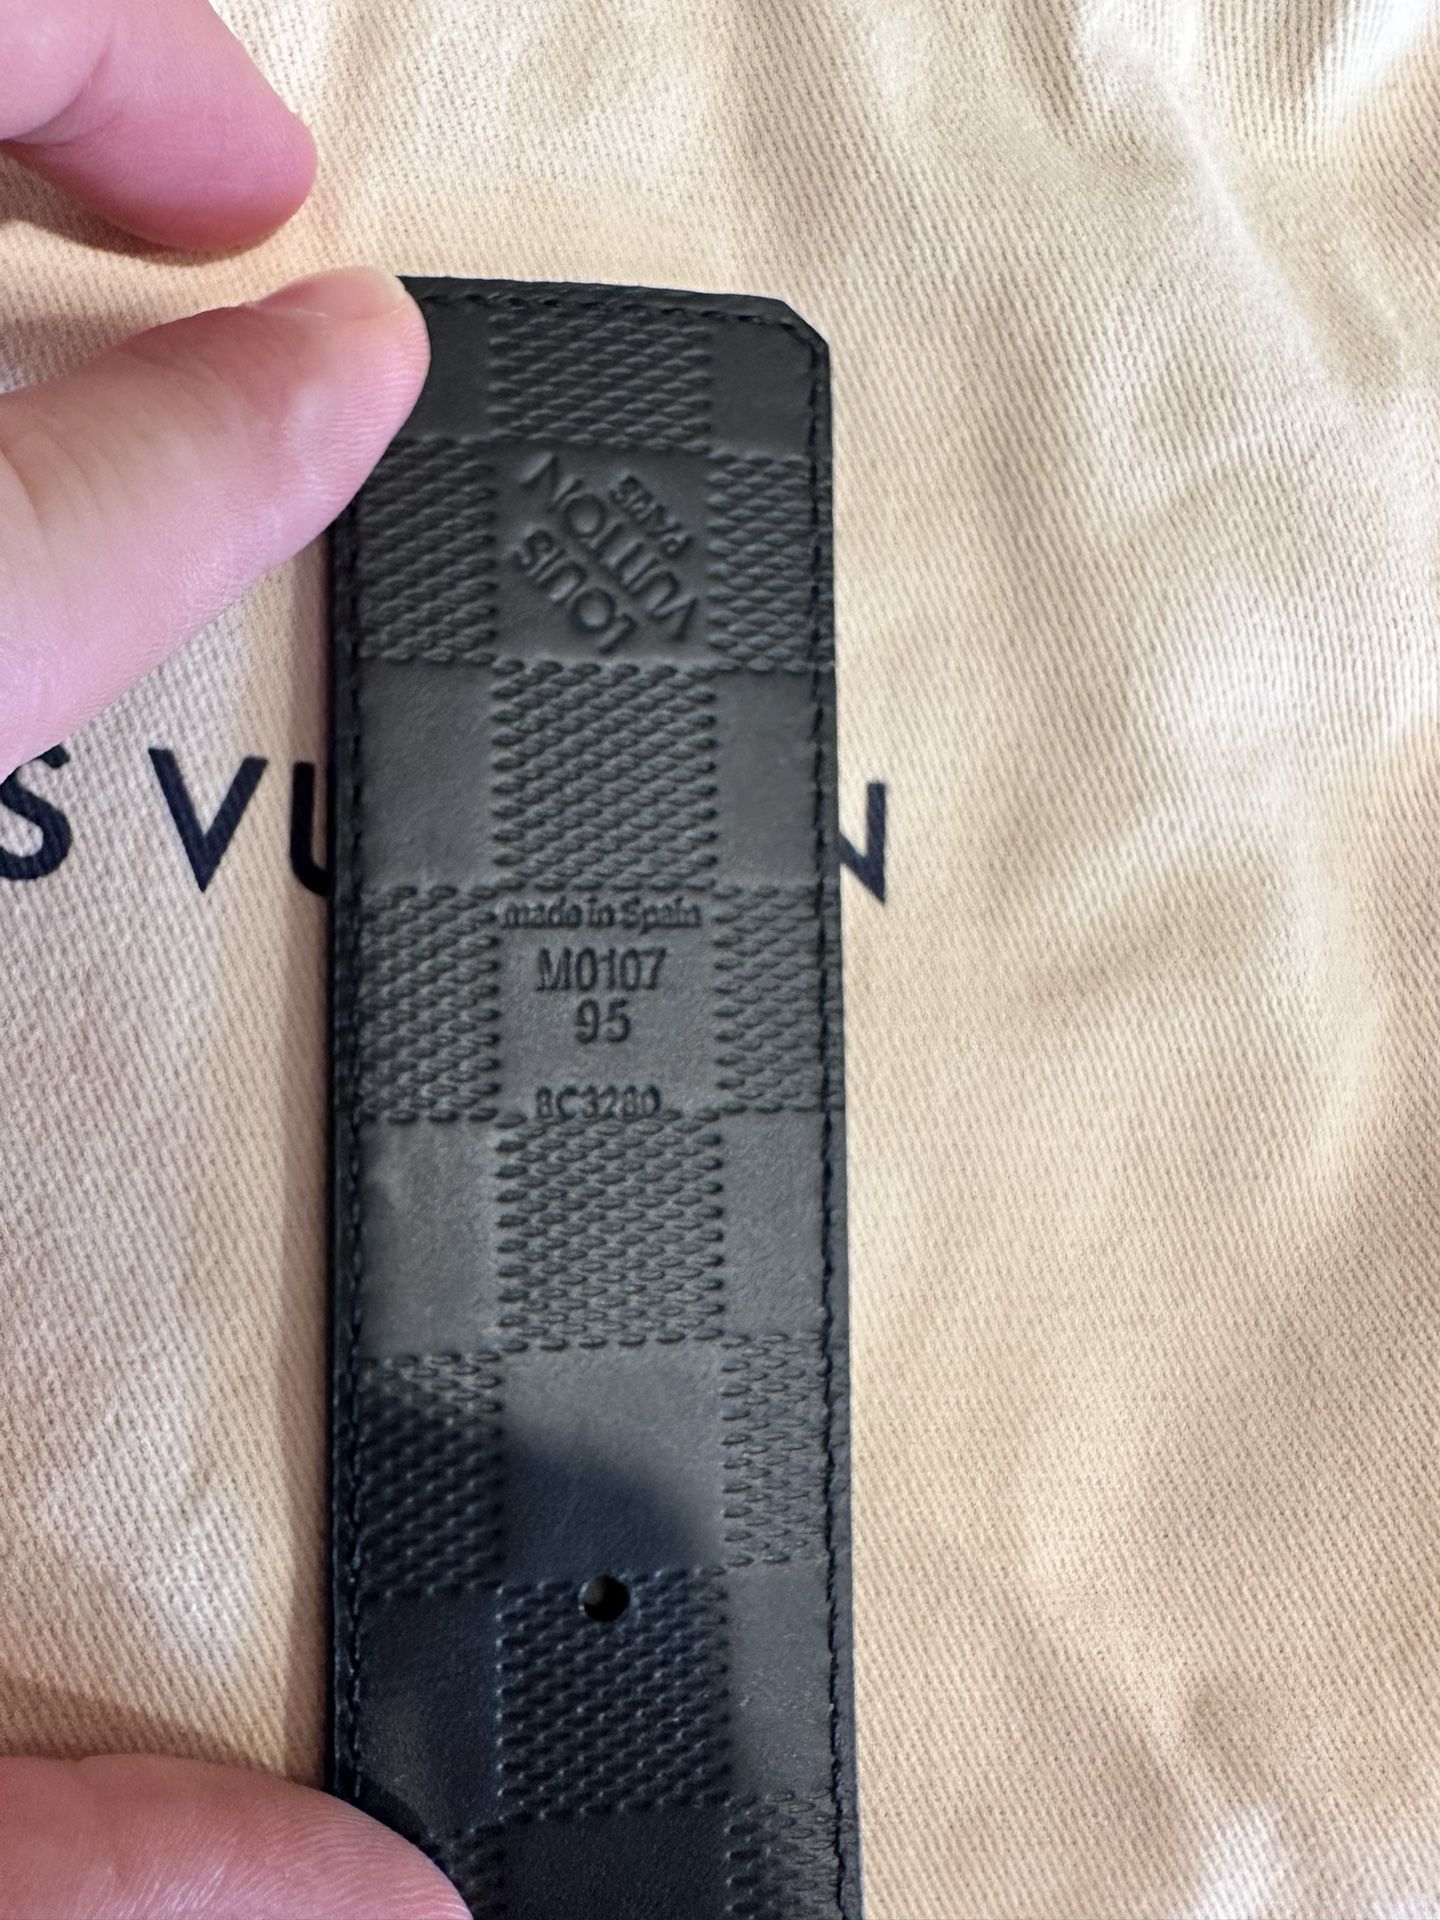 Louis Vuitton LV Initiales 40mm Reversible Belt for Sale in Irvine, CA